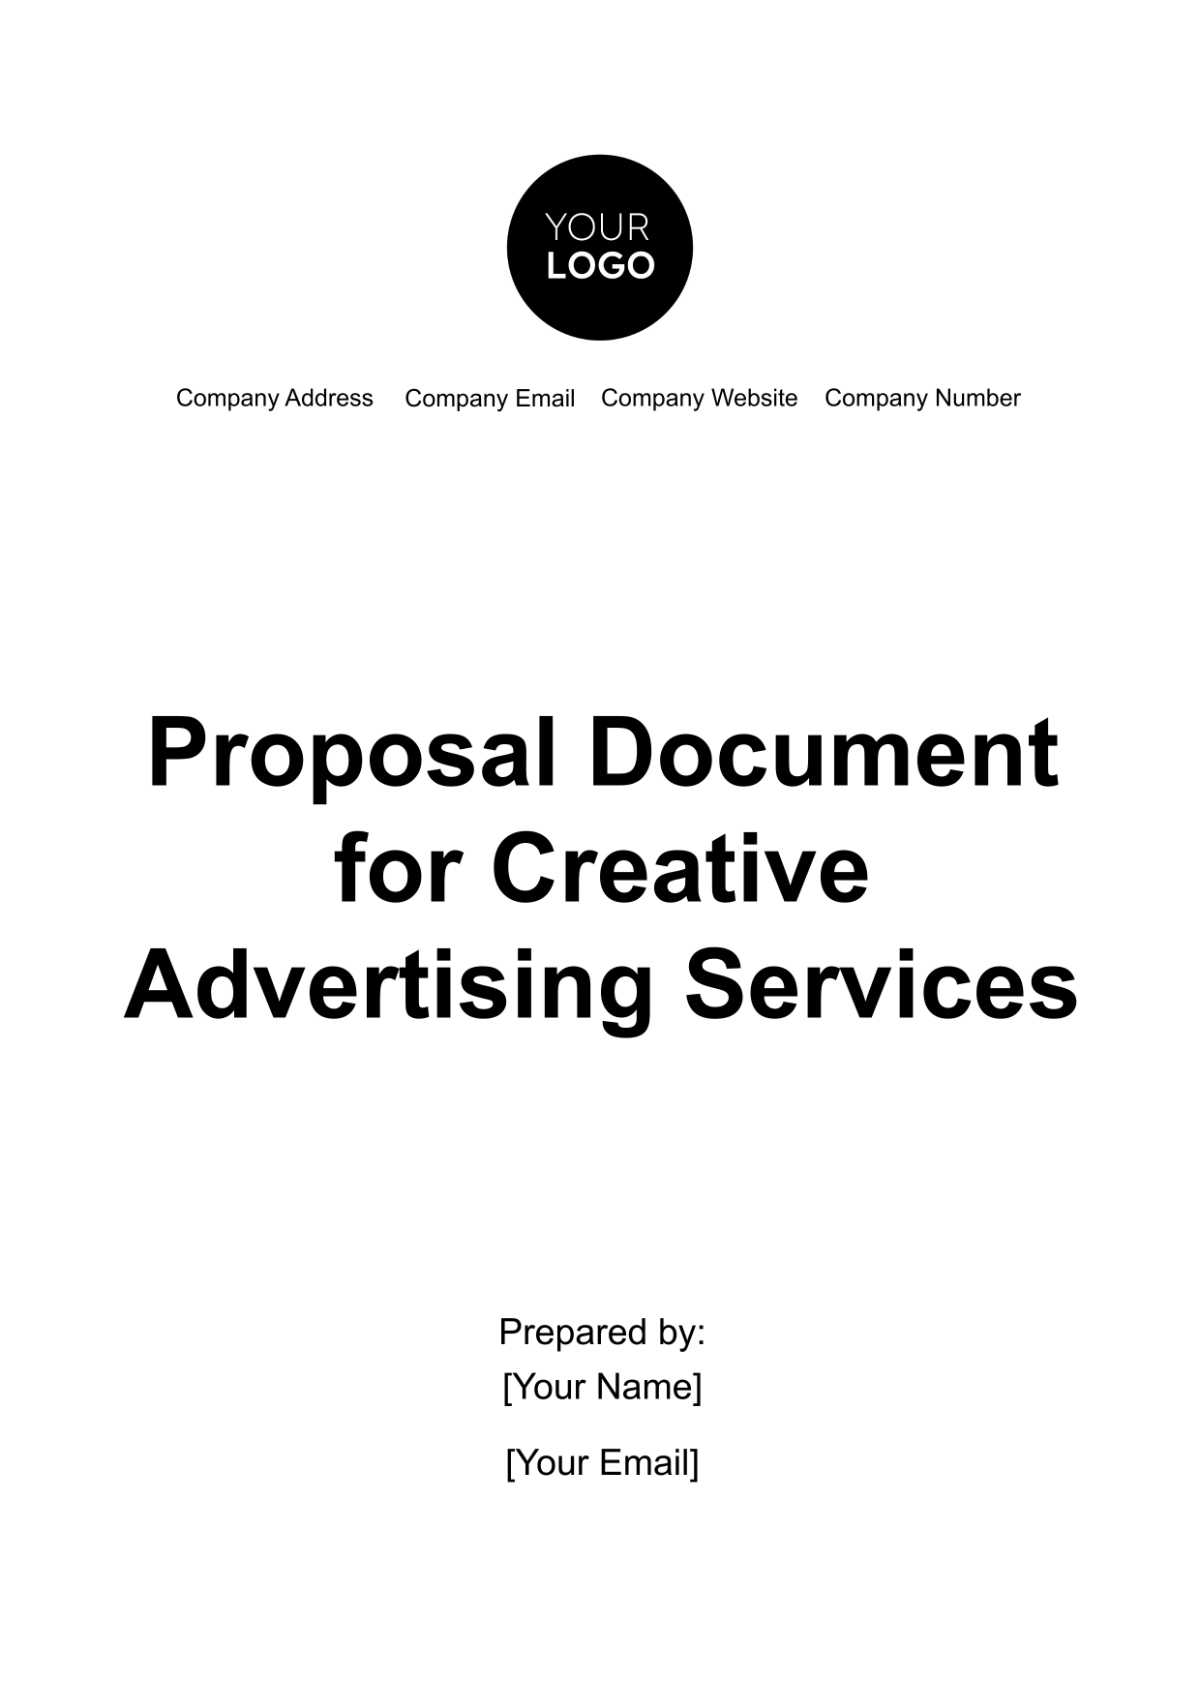 Free Proposal Document for Creative Advertising Services Template